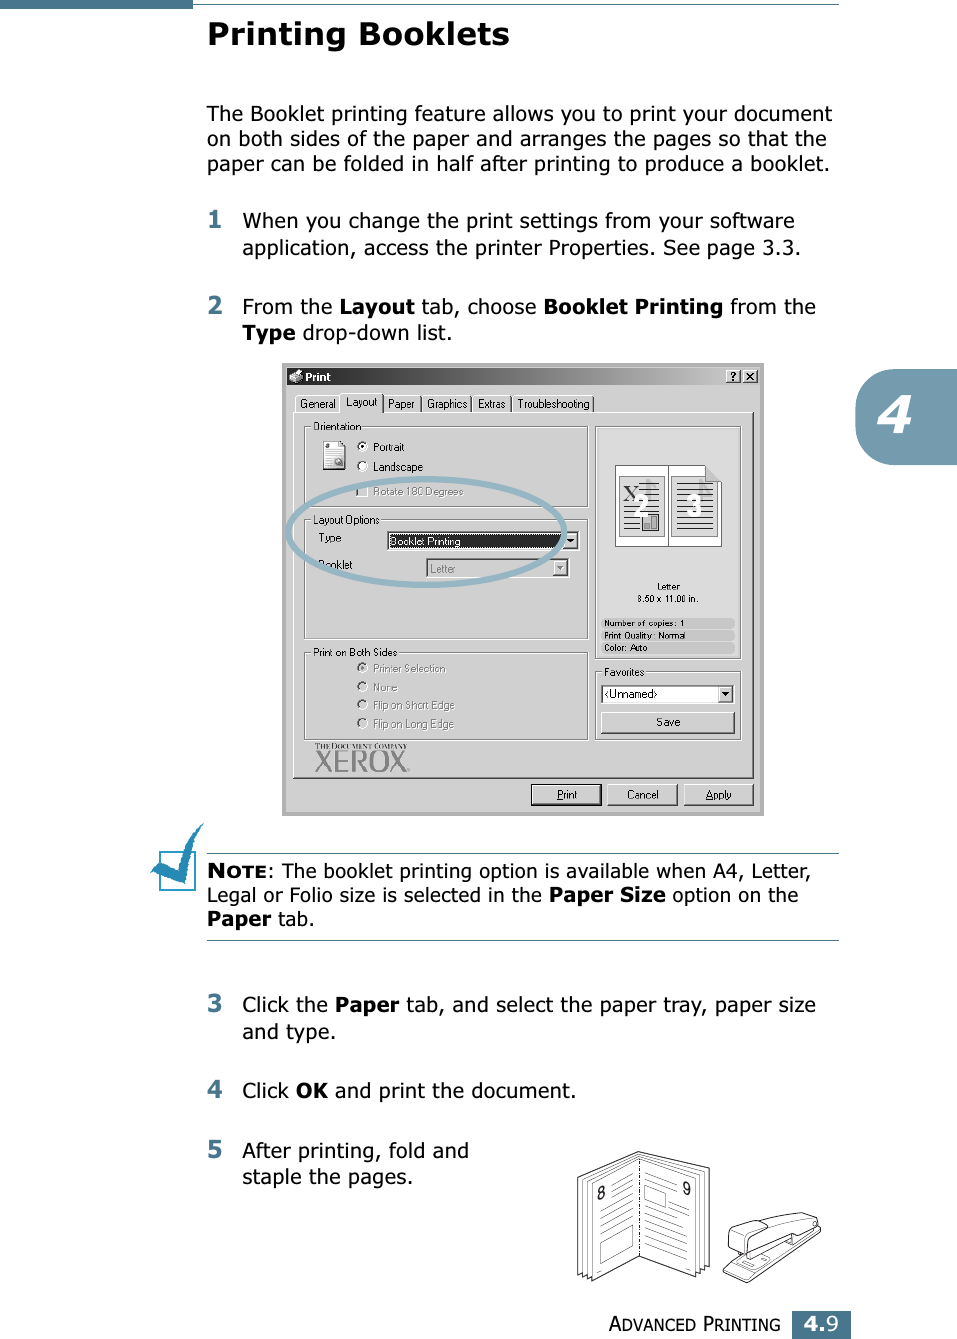 ADVANCED PRINTING4.94Printing BookletsThe Booklet printing feature allows you to print your document on both sides of the paper and arranges the pages so that the paper can be folded in half after printing to produce a booklet. 1When you change the print settings from your software application, access the printer Properties. See page 3.3.2From the Layout tab, choose Booklet Printing from the Type drop-down list. NOTE: The booklet printing option is available when A4, Letter, Legal or Folio size is selected in the Paper Size option on the Paper tab.3Click the Paper tab, and select the paper tray, paper size and type.4Click OK and print the document.5After printing, fold and staple the pages. 89